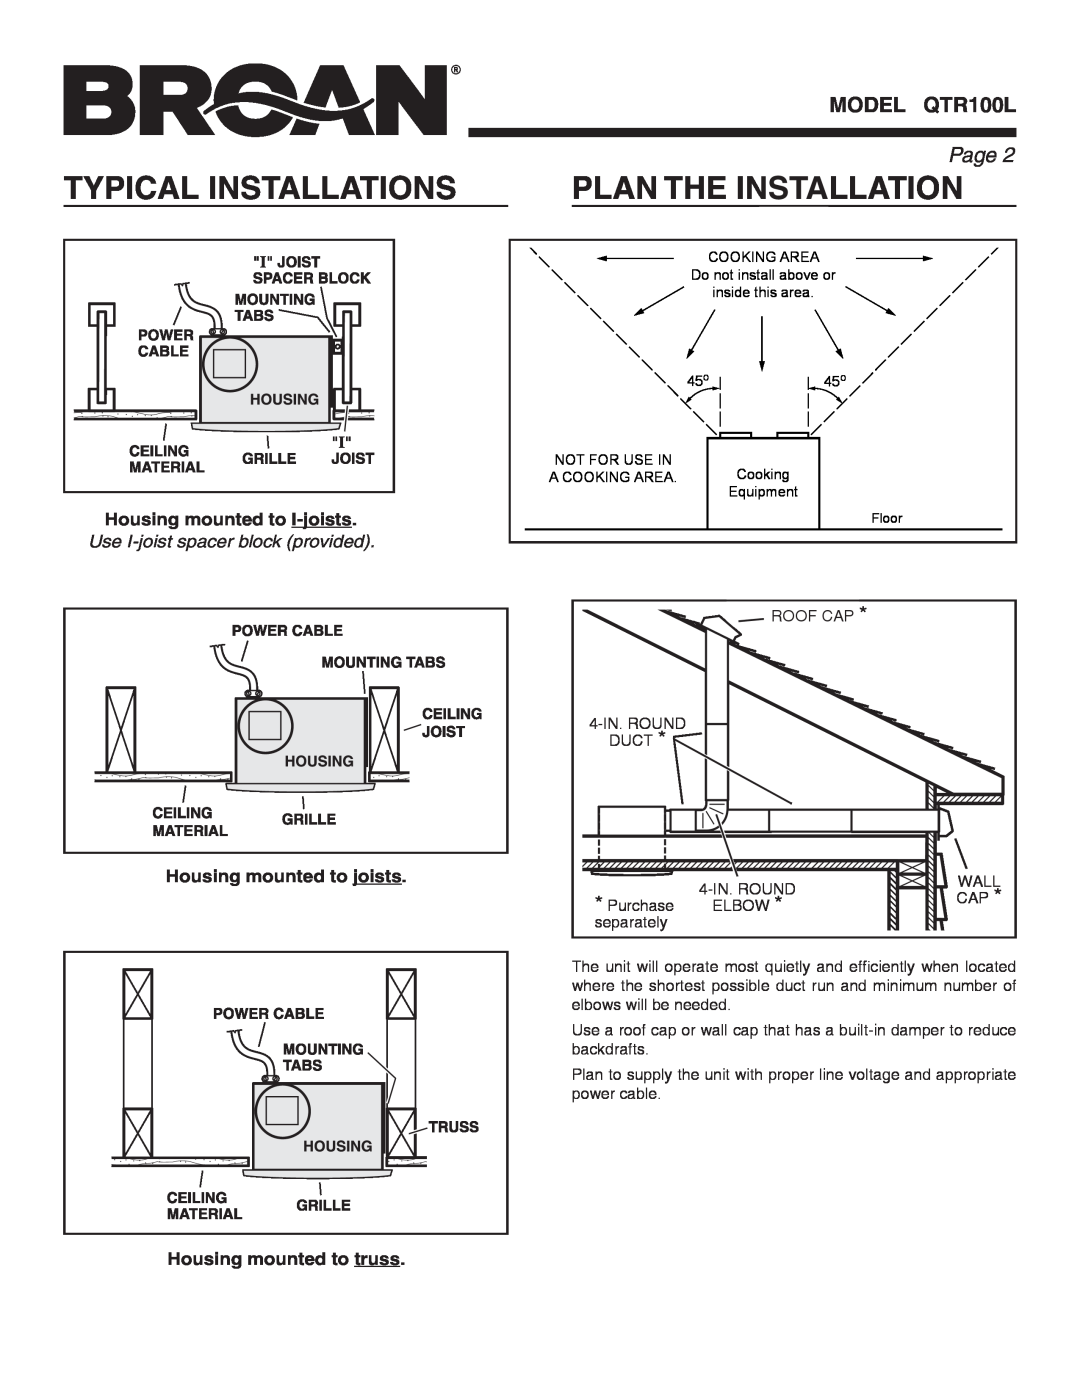 Broan QTR100L Typical Installations, Plan The Installation, Page , Housing mounted to I-joists, Housing mounted to joists 